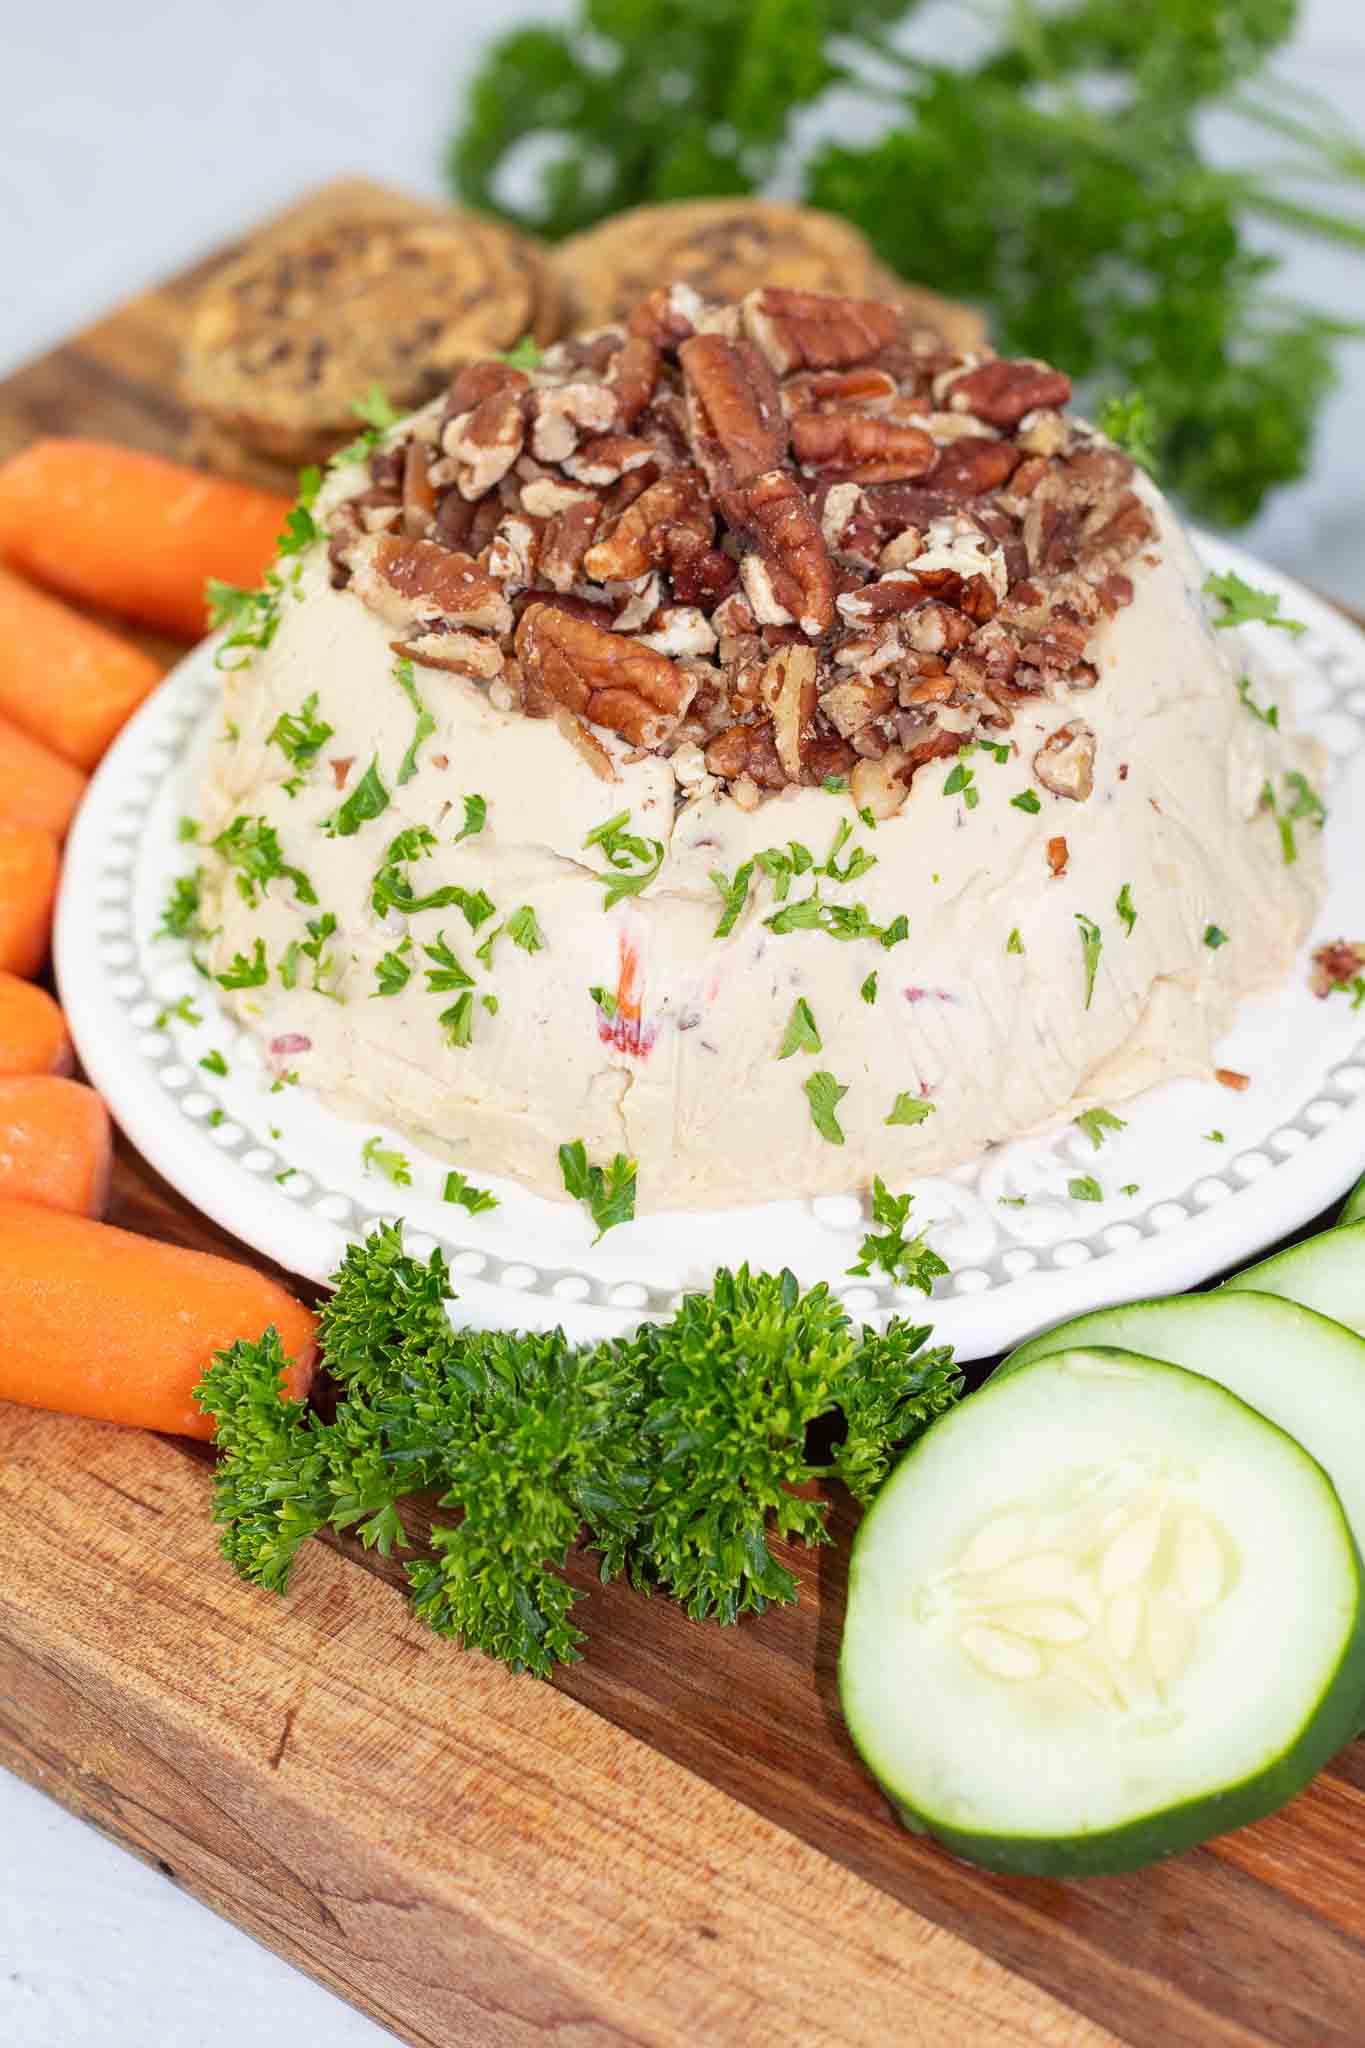 wooden board filled with cucumber slices, baby carrots, and crackers with a vegan cheese ball topped with pecan pieces in the middle.